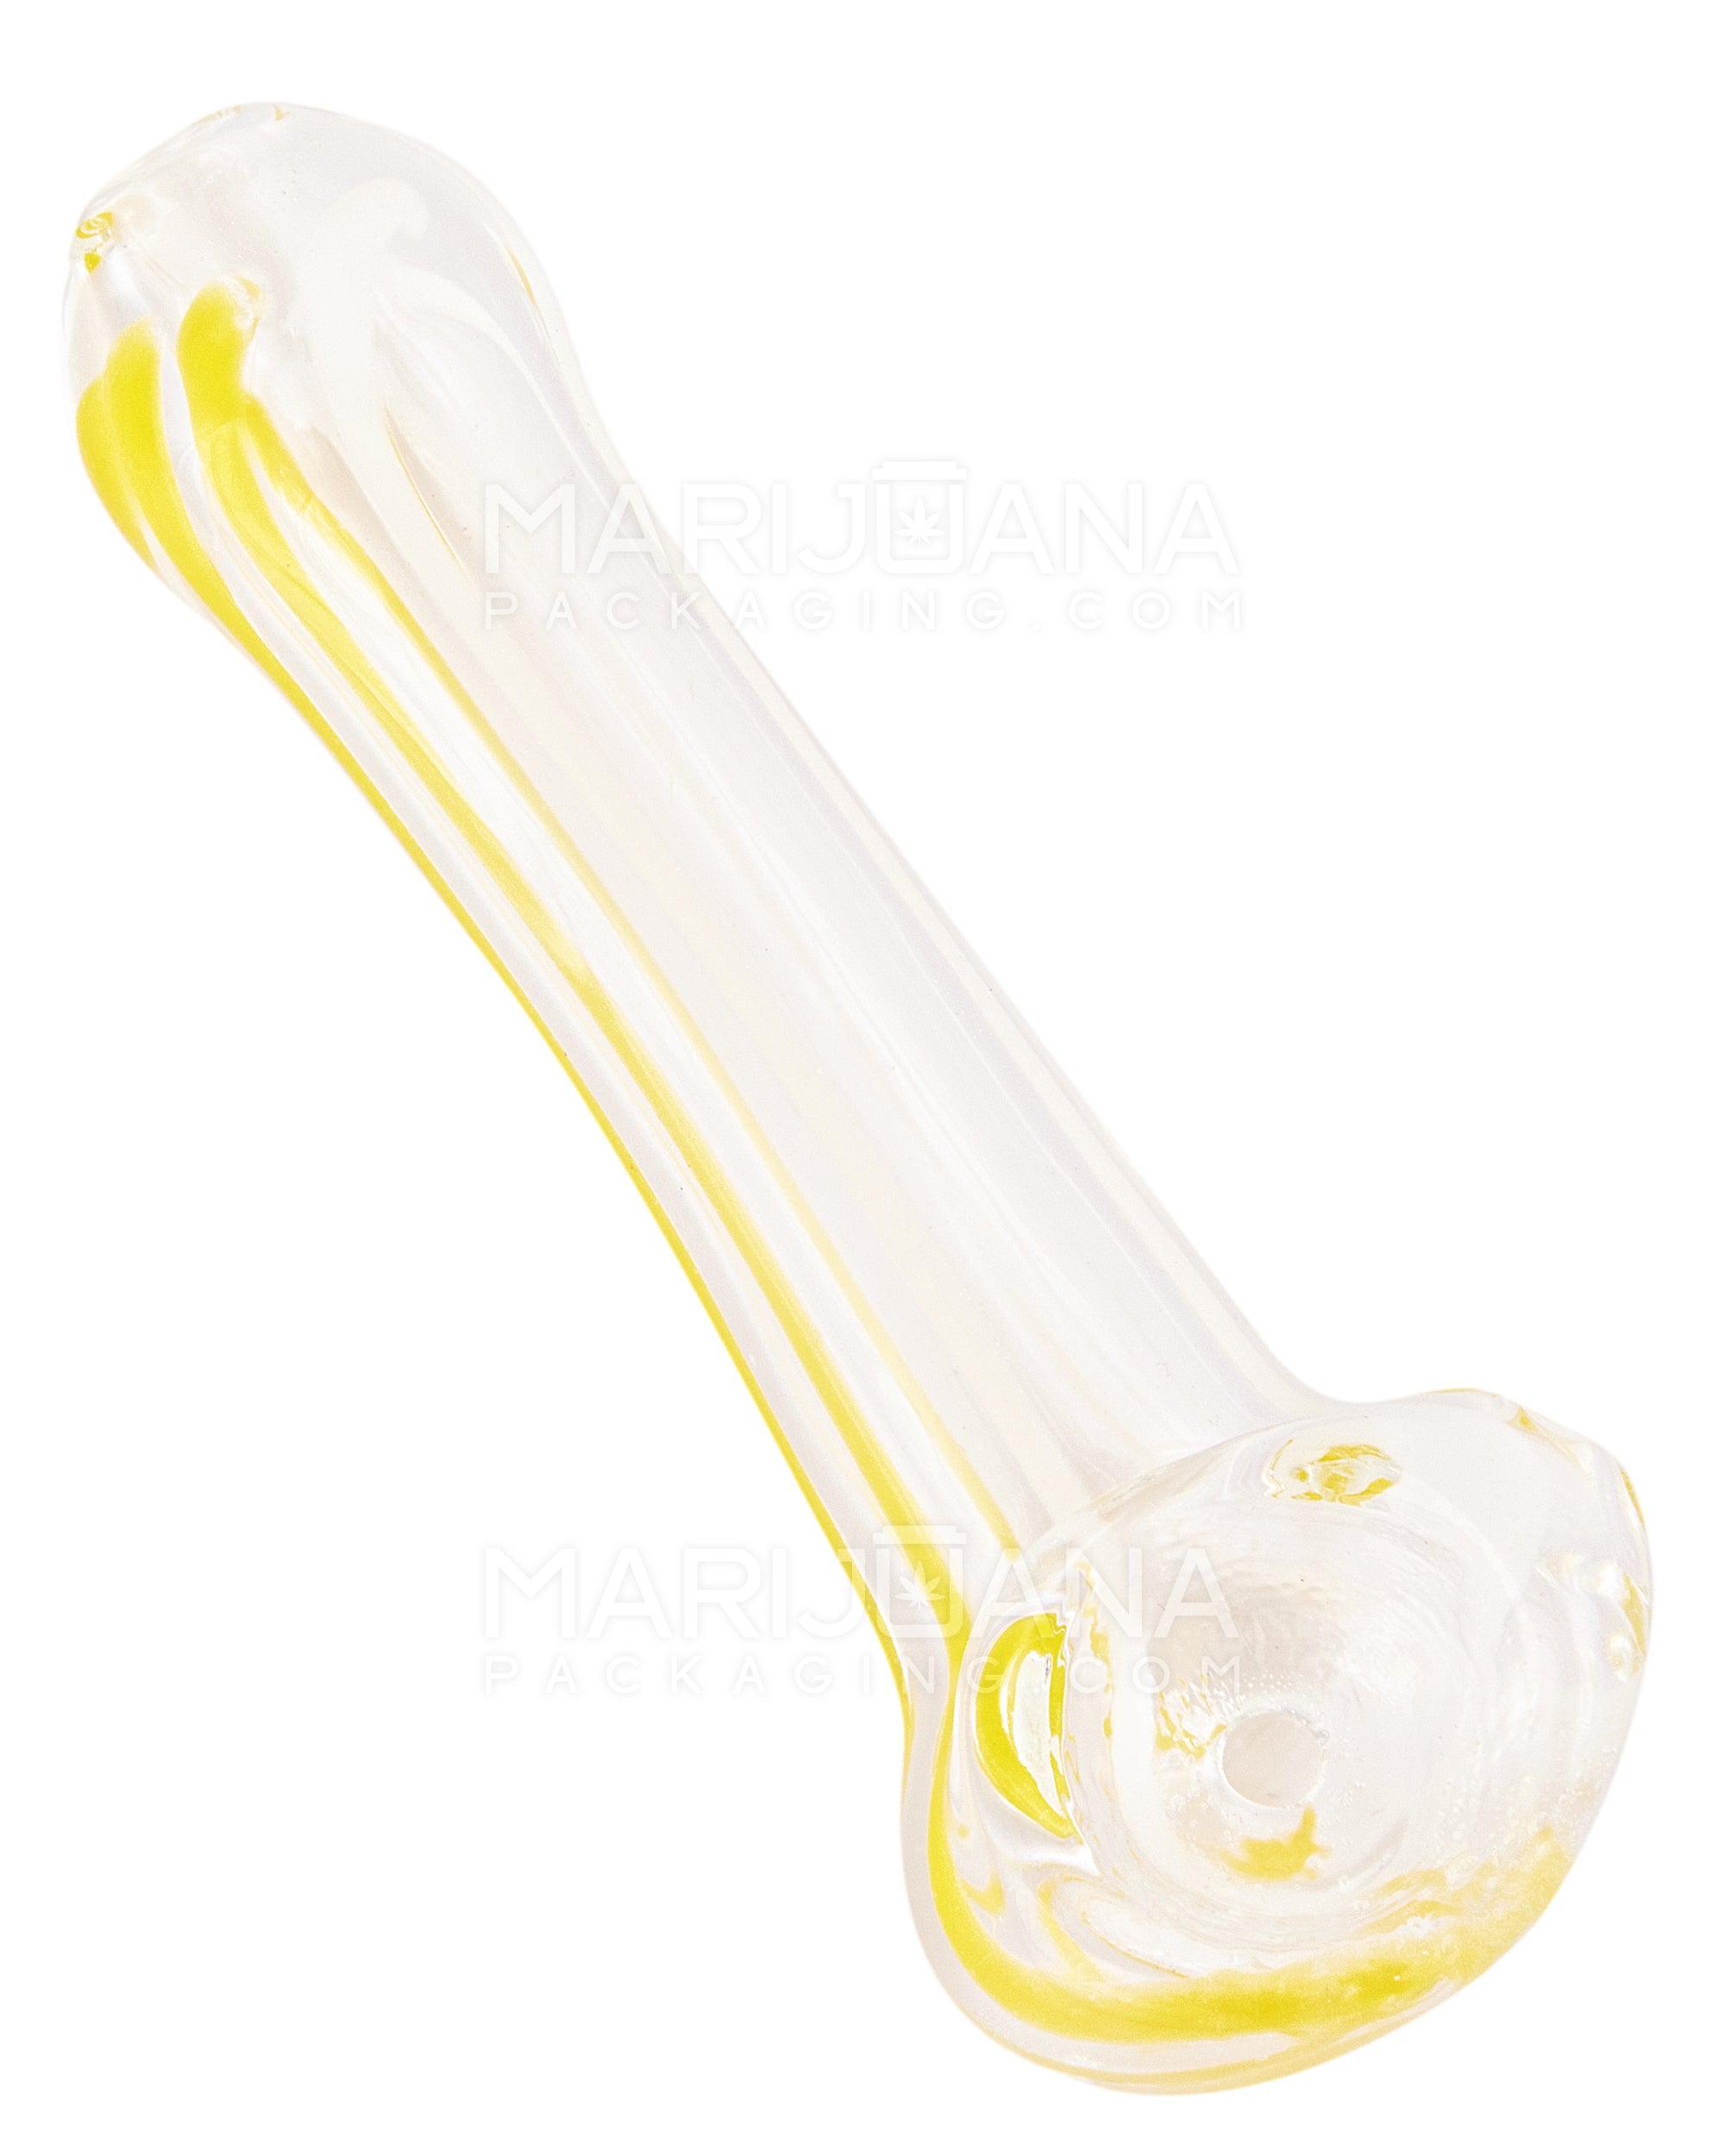 Assorted Swirl Spoon Hand Pipe | 2.5in Long - Glass - 50 Count - 8